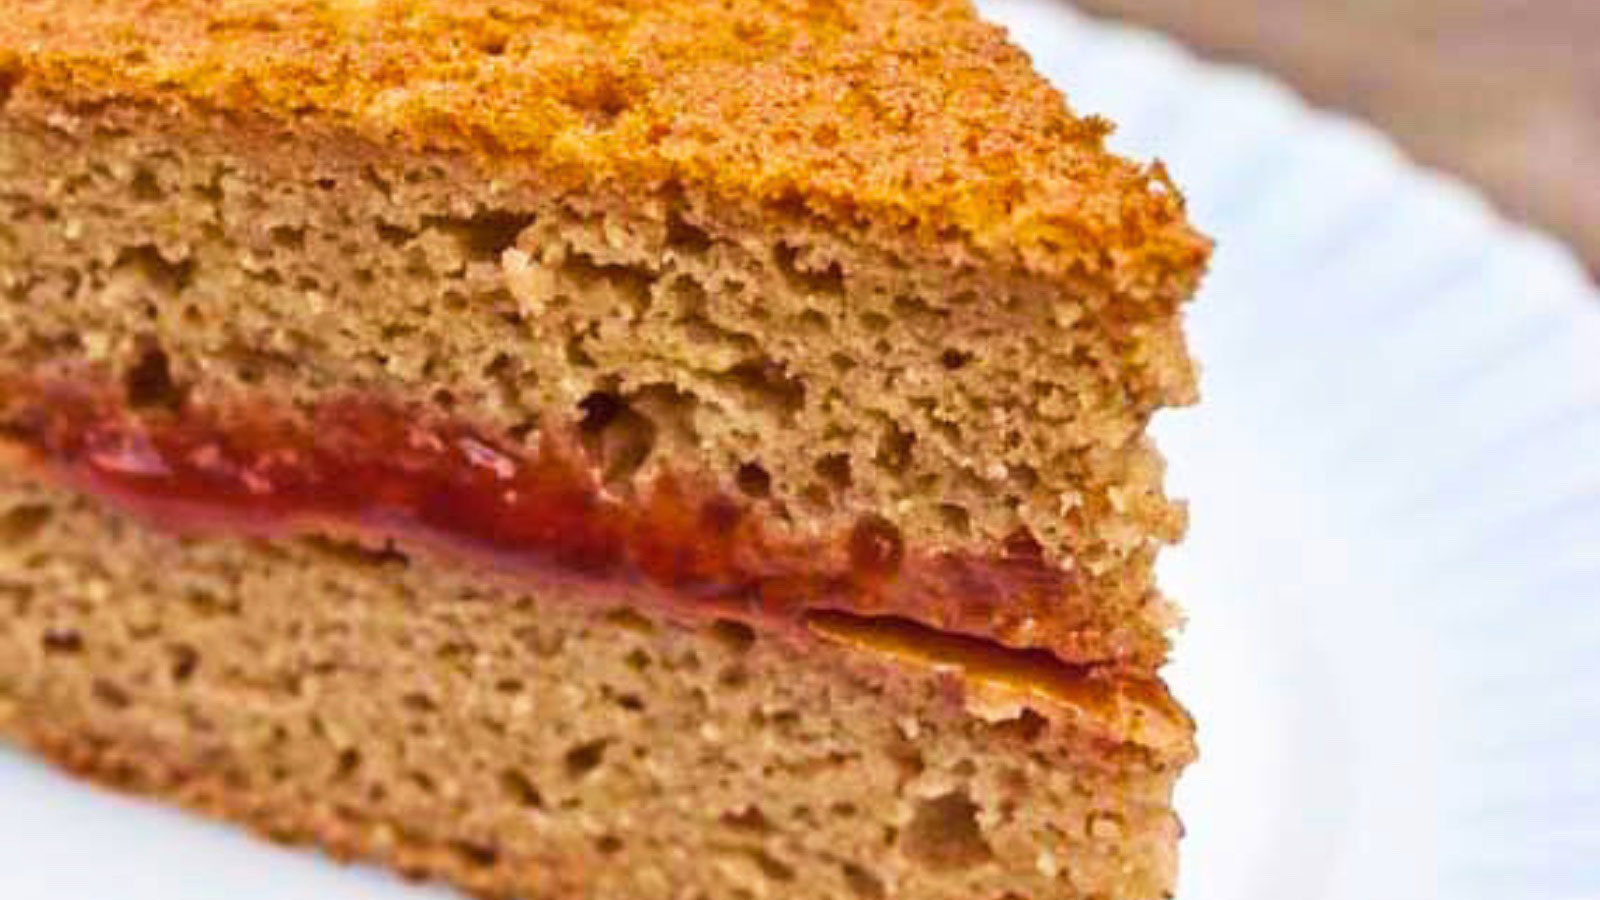 An up close view of a slice of whole wheat cake on a white plate.